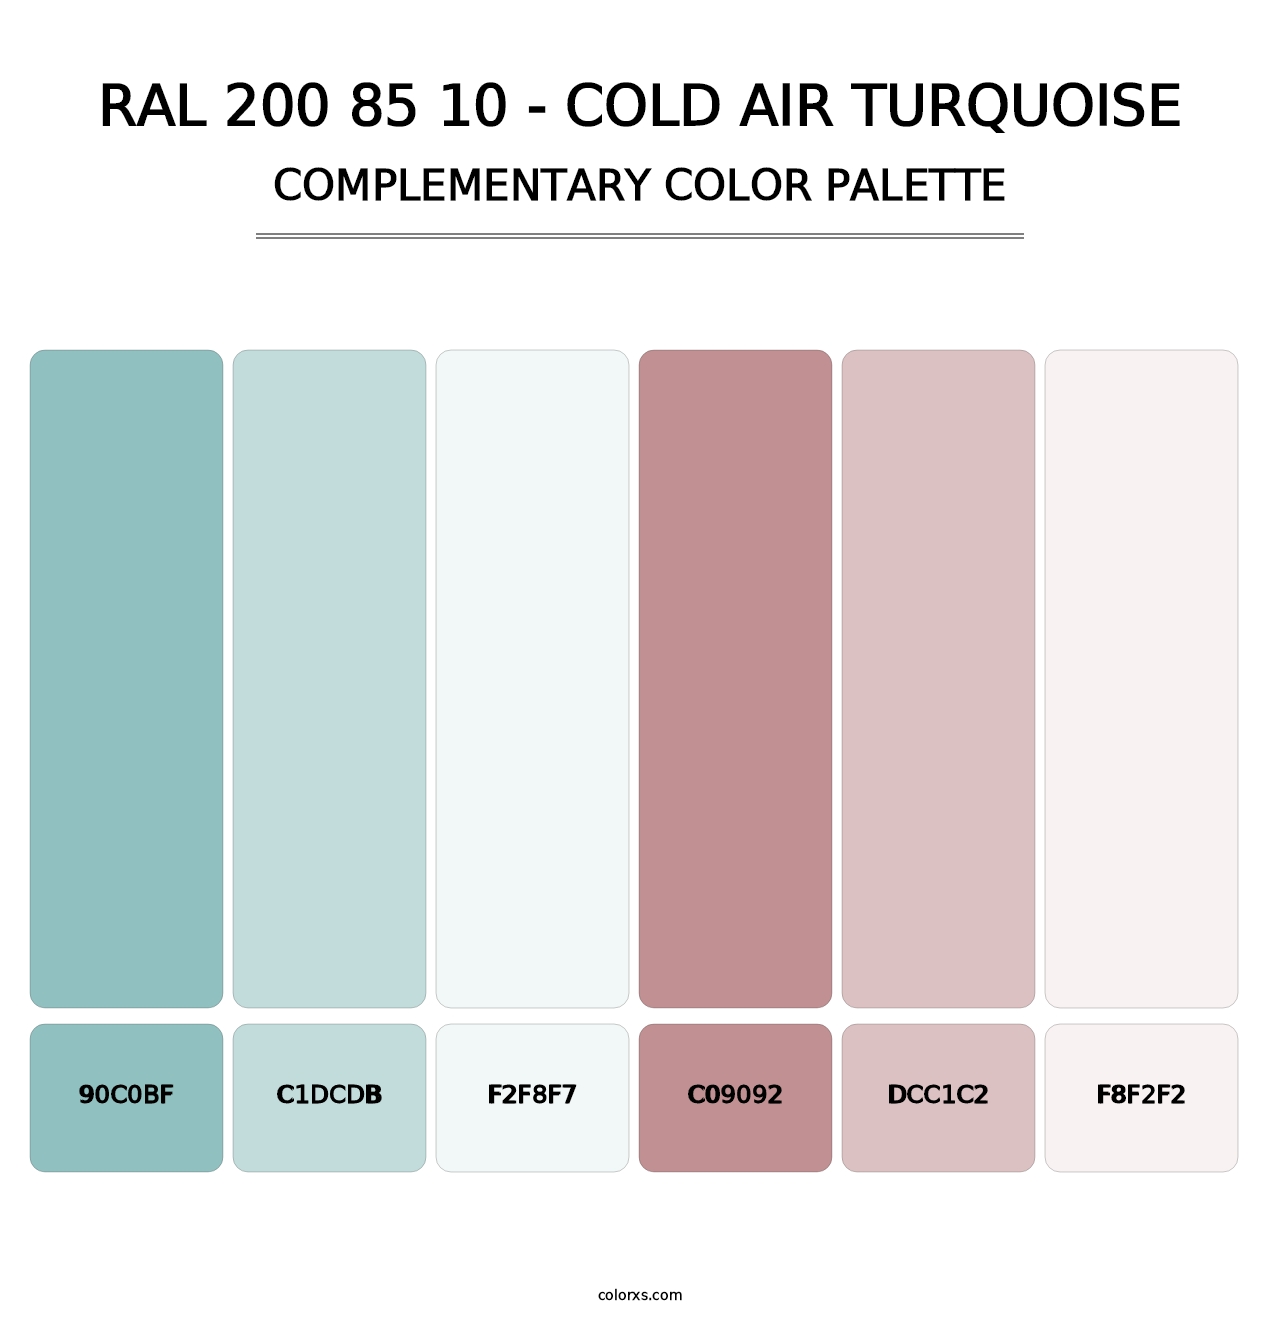 RAL 200 85 10 - Cold Air Turquoise - Complementary Color Palette